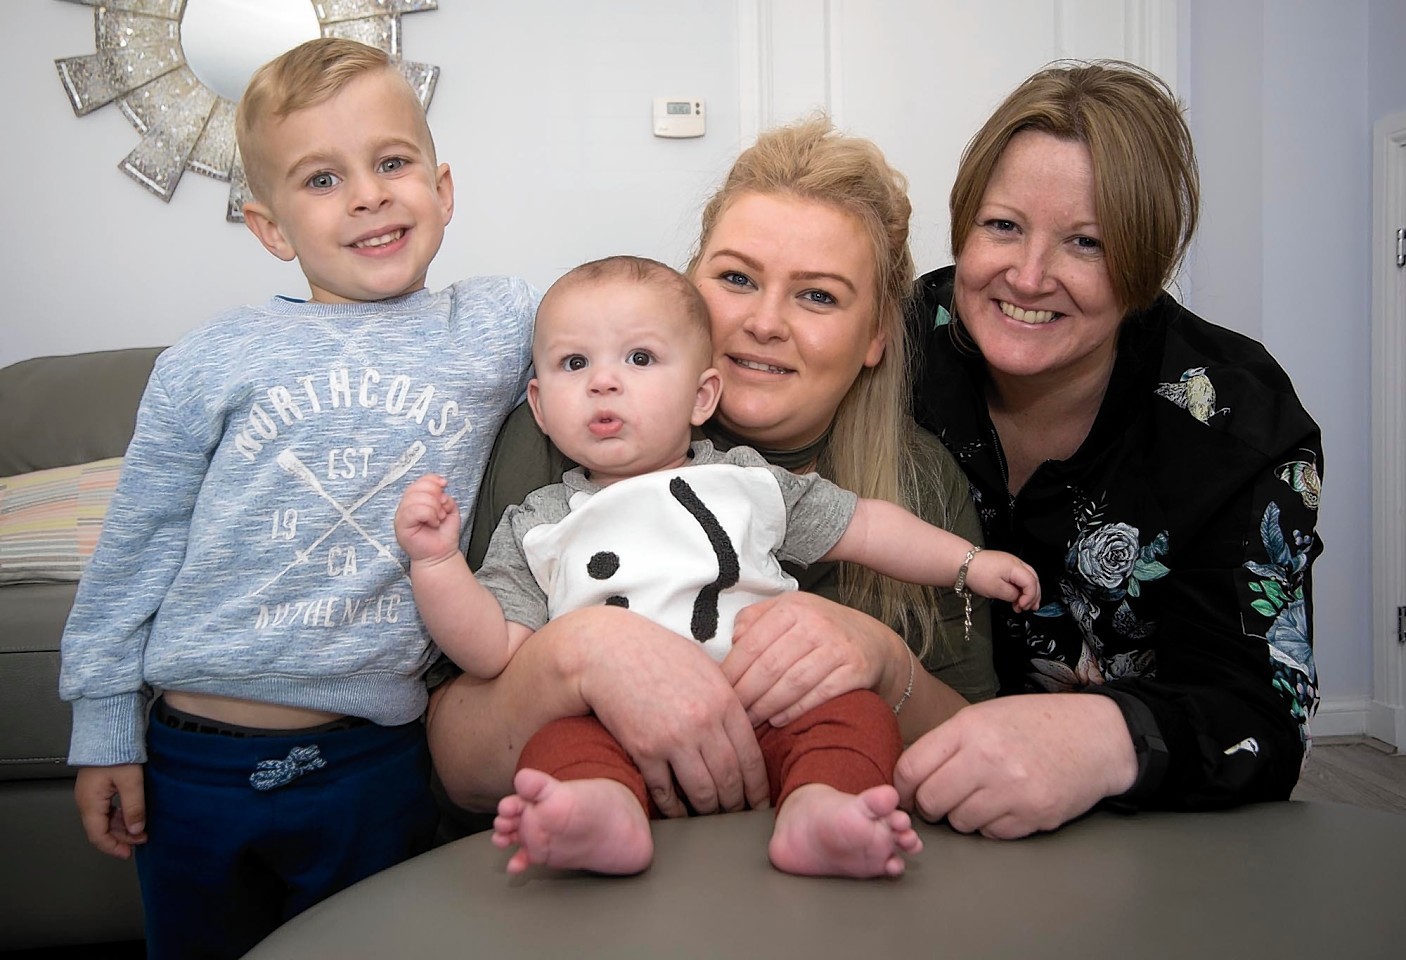 In photo is Ethan, four, with mum Emma (in black) and Julie Hunter (in green) with baby Zayn, six-months.